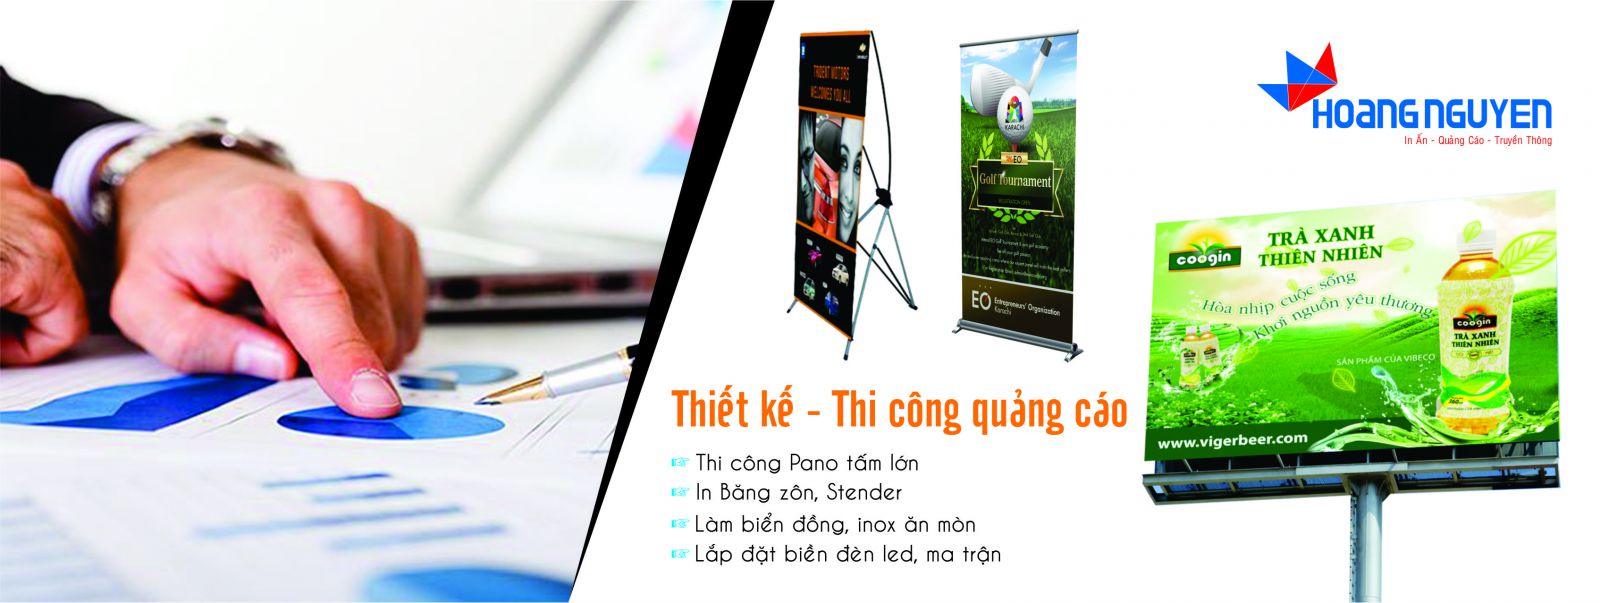 Thiết kế banner-poster